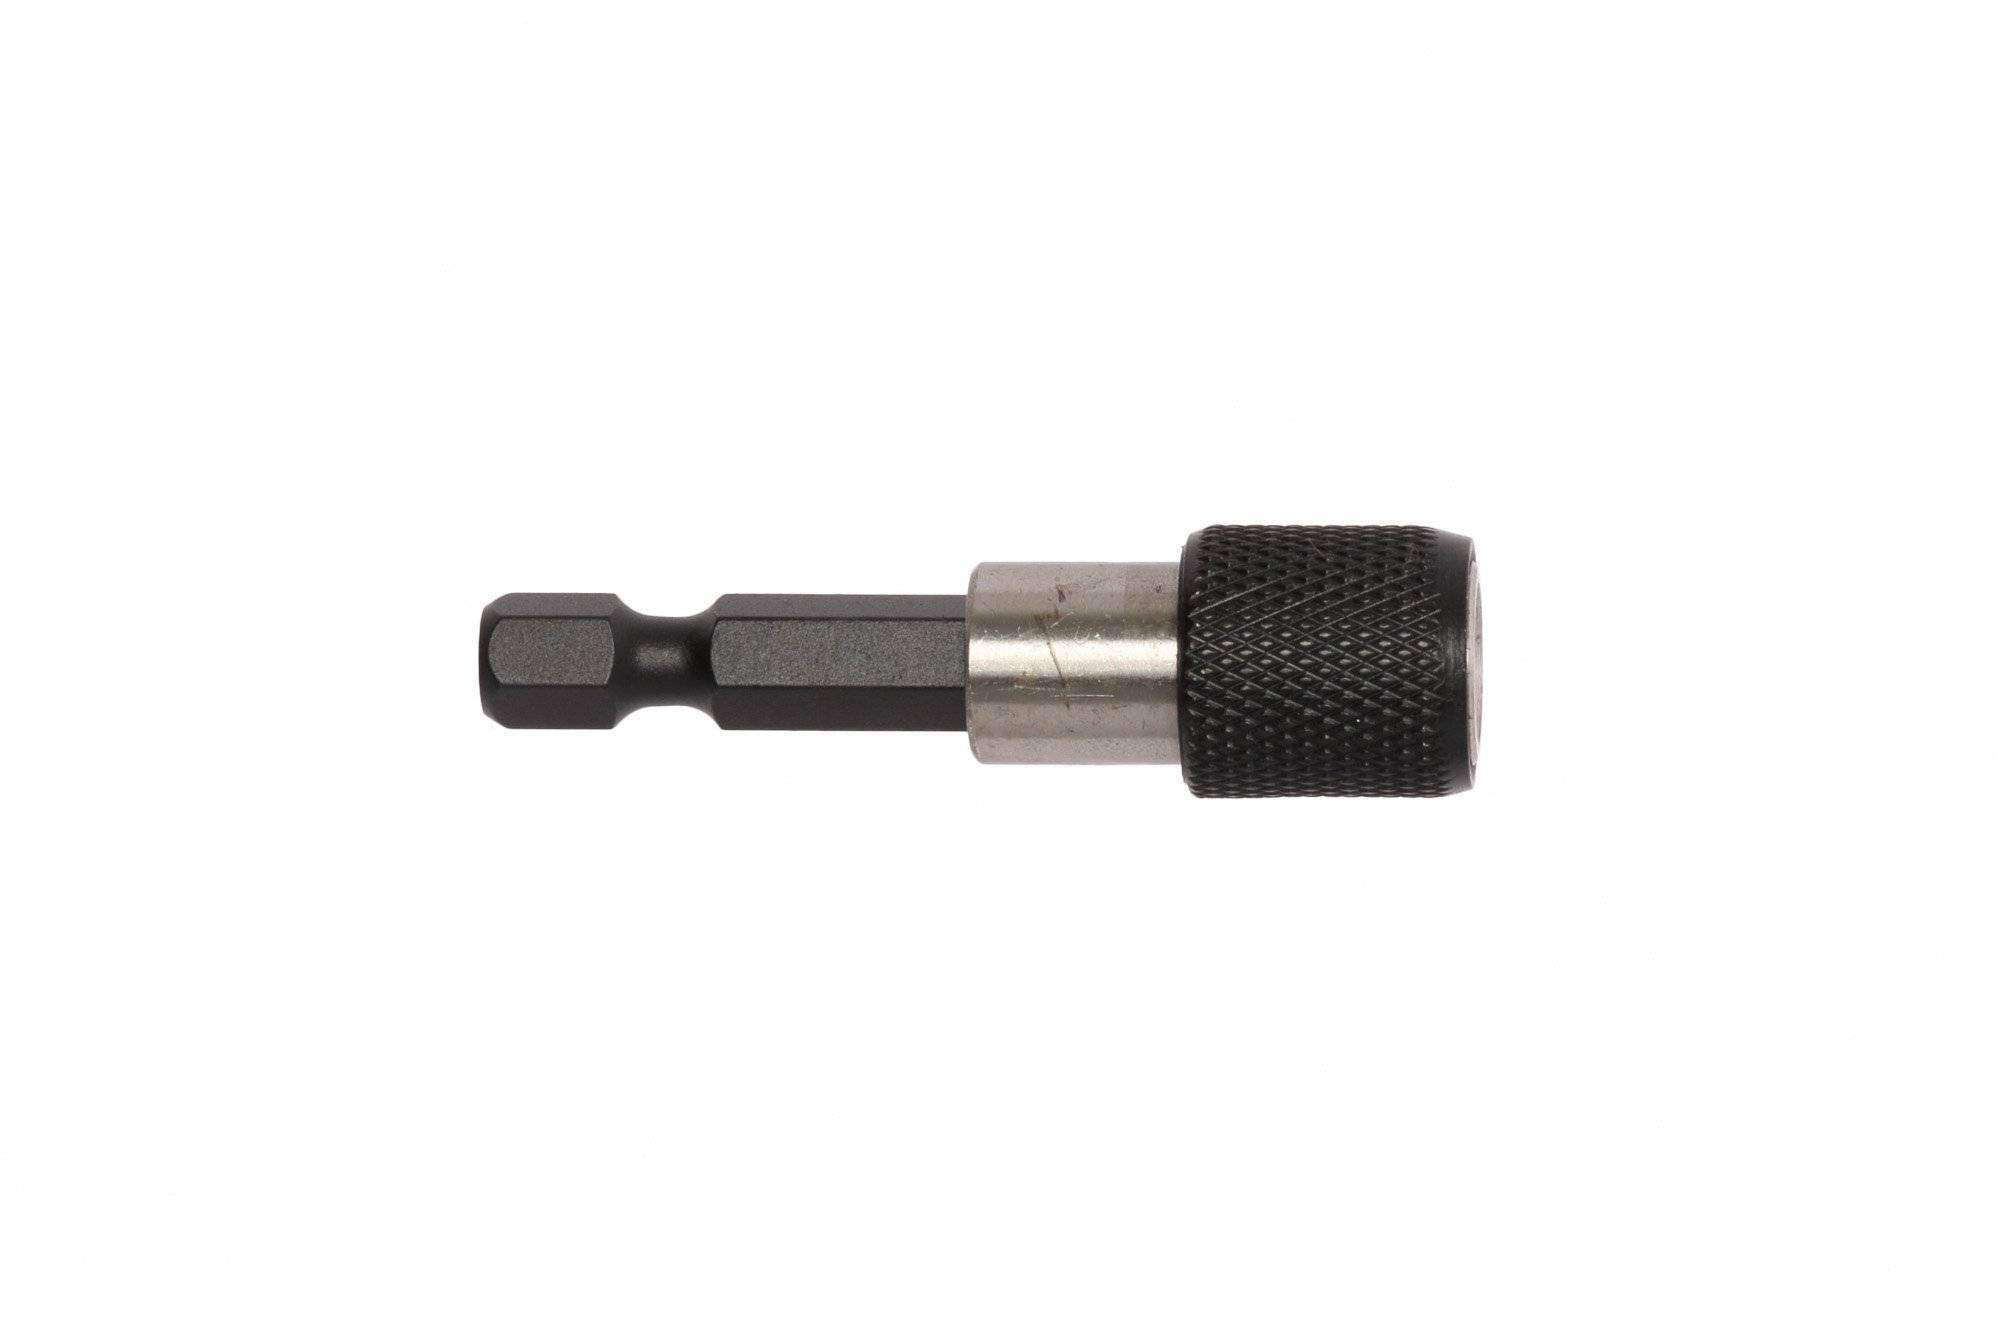 Teng Tools 1/4 Inch Drive Hex Drive 35mm Chuck Bit and Holder -ACC35CBH01